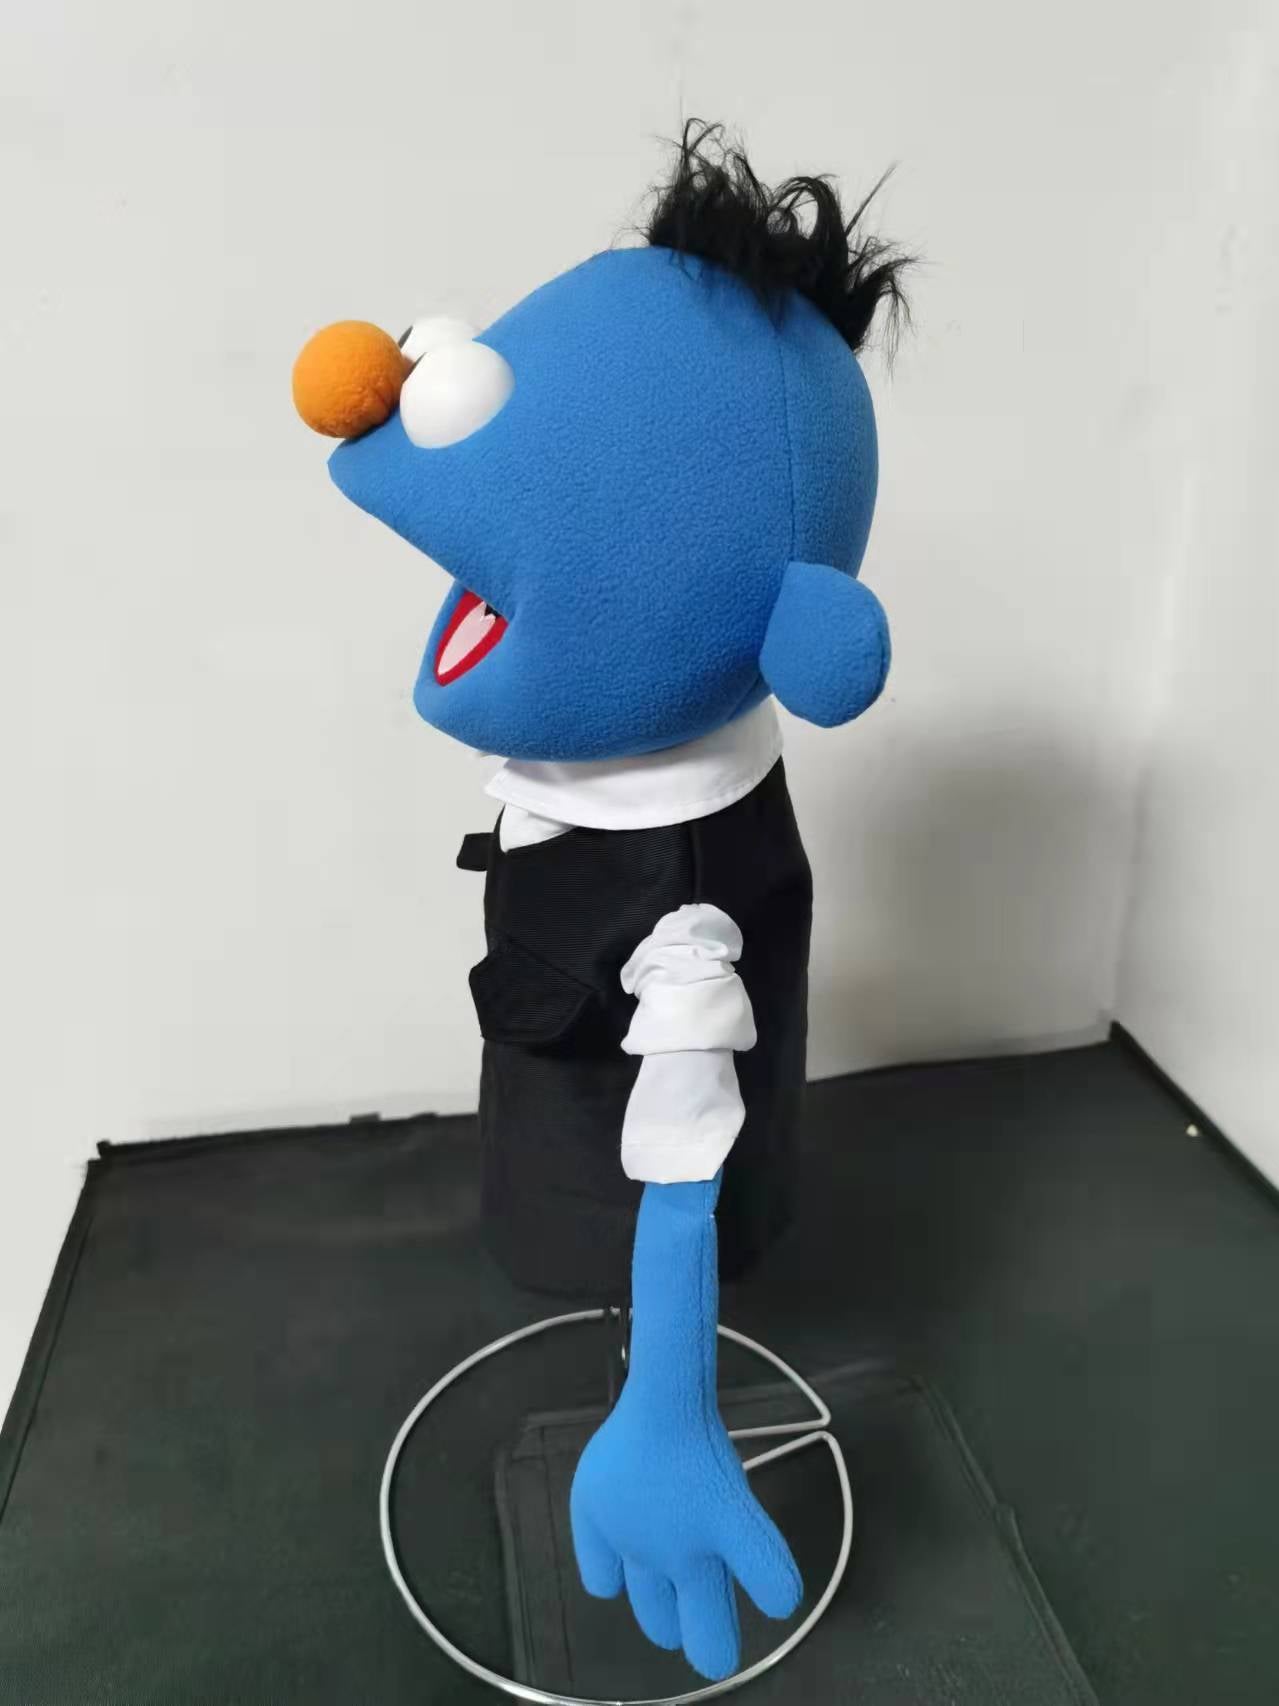 Mini 2: Sam Premium 35cm Hand Puppet PRE-ORDER & SAVE 20% for May Release!